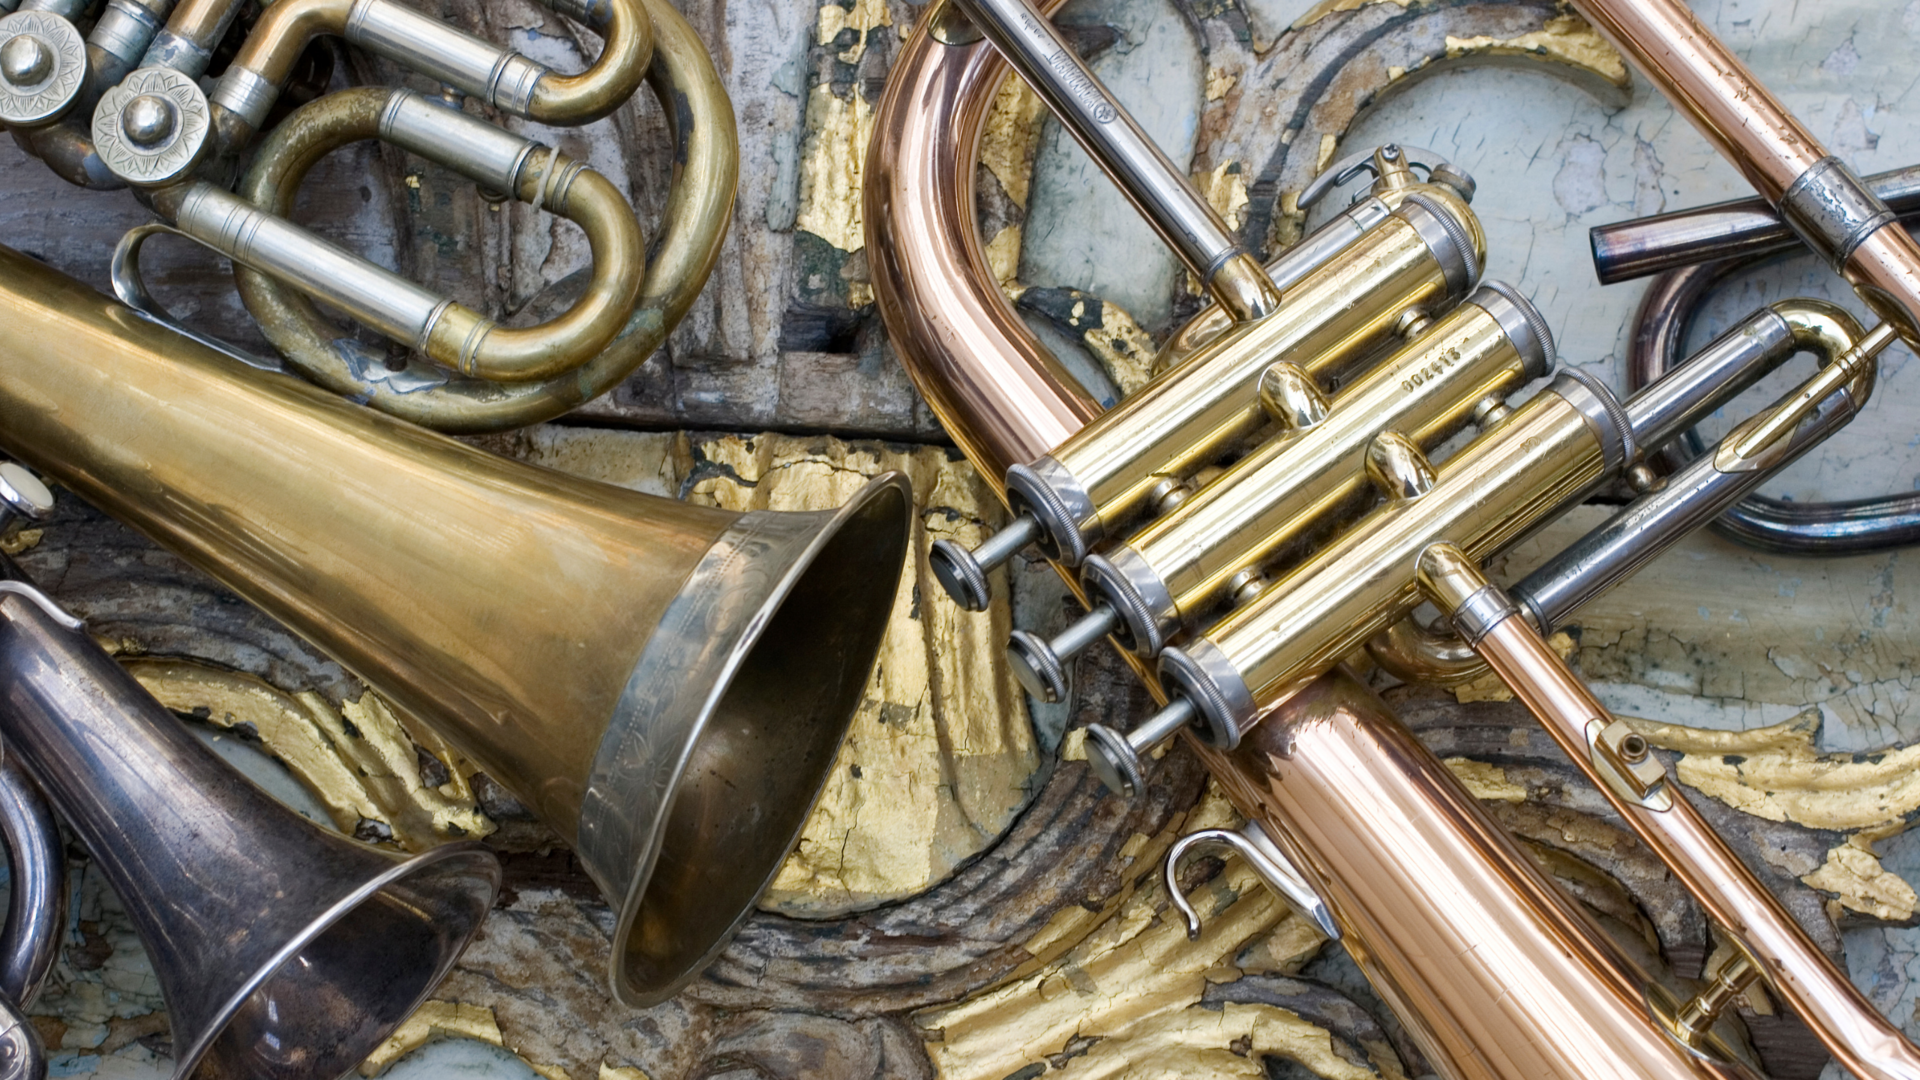 Brass instruments in the orchestra--the horn